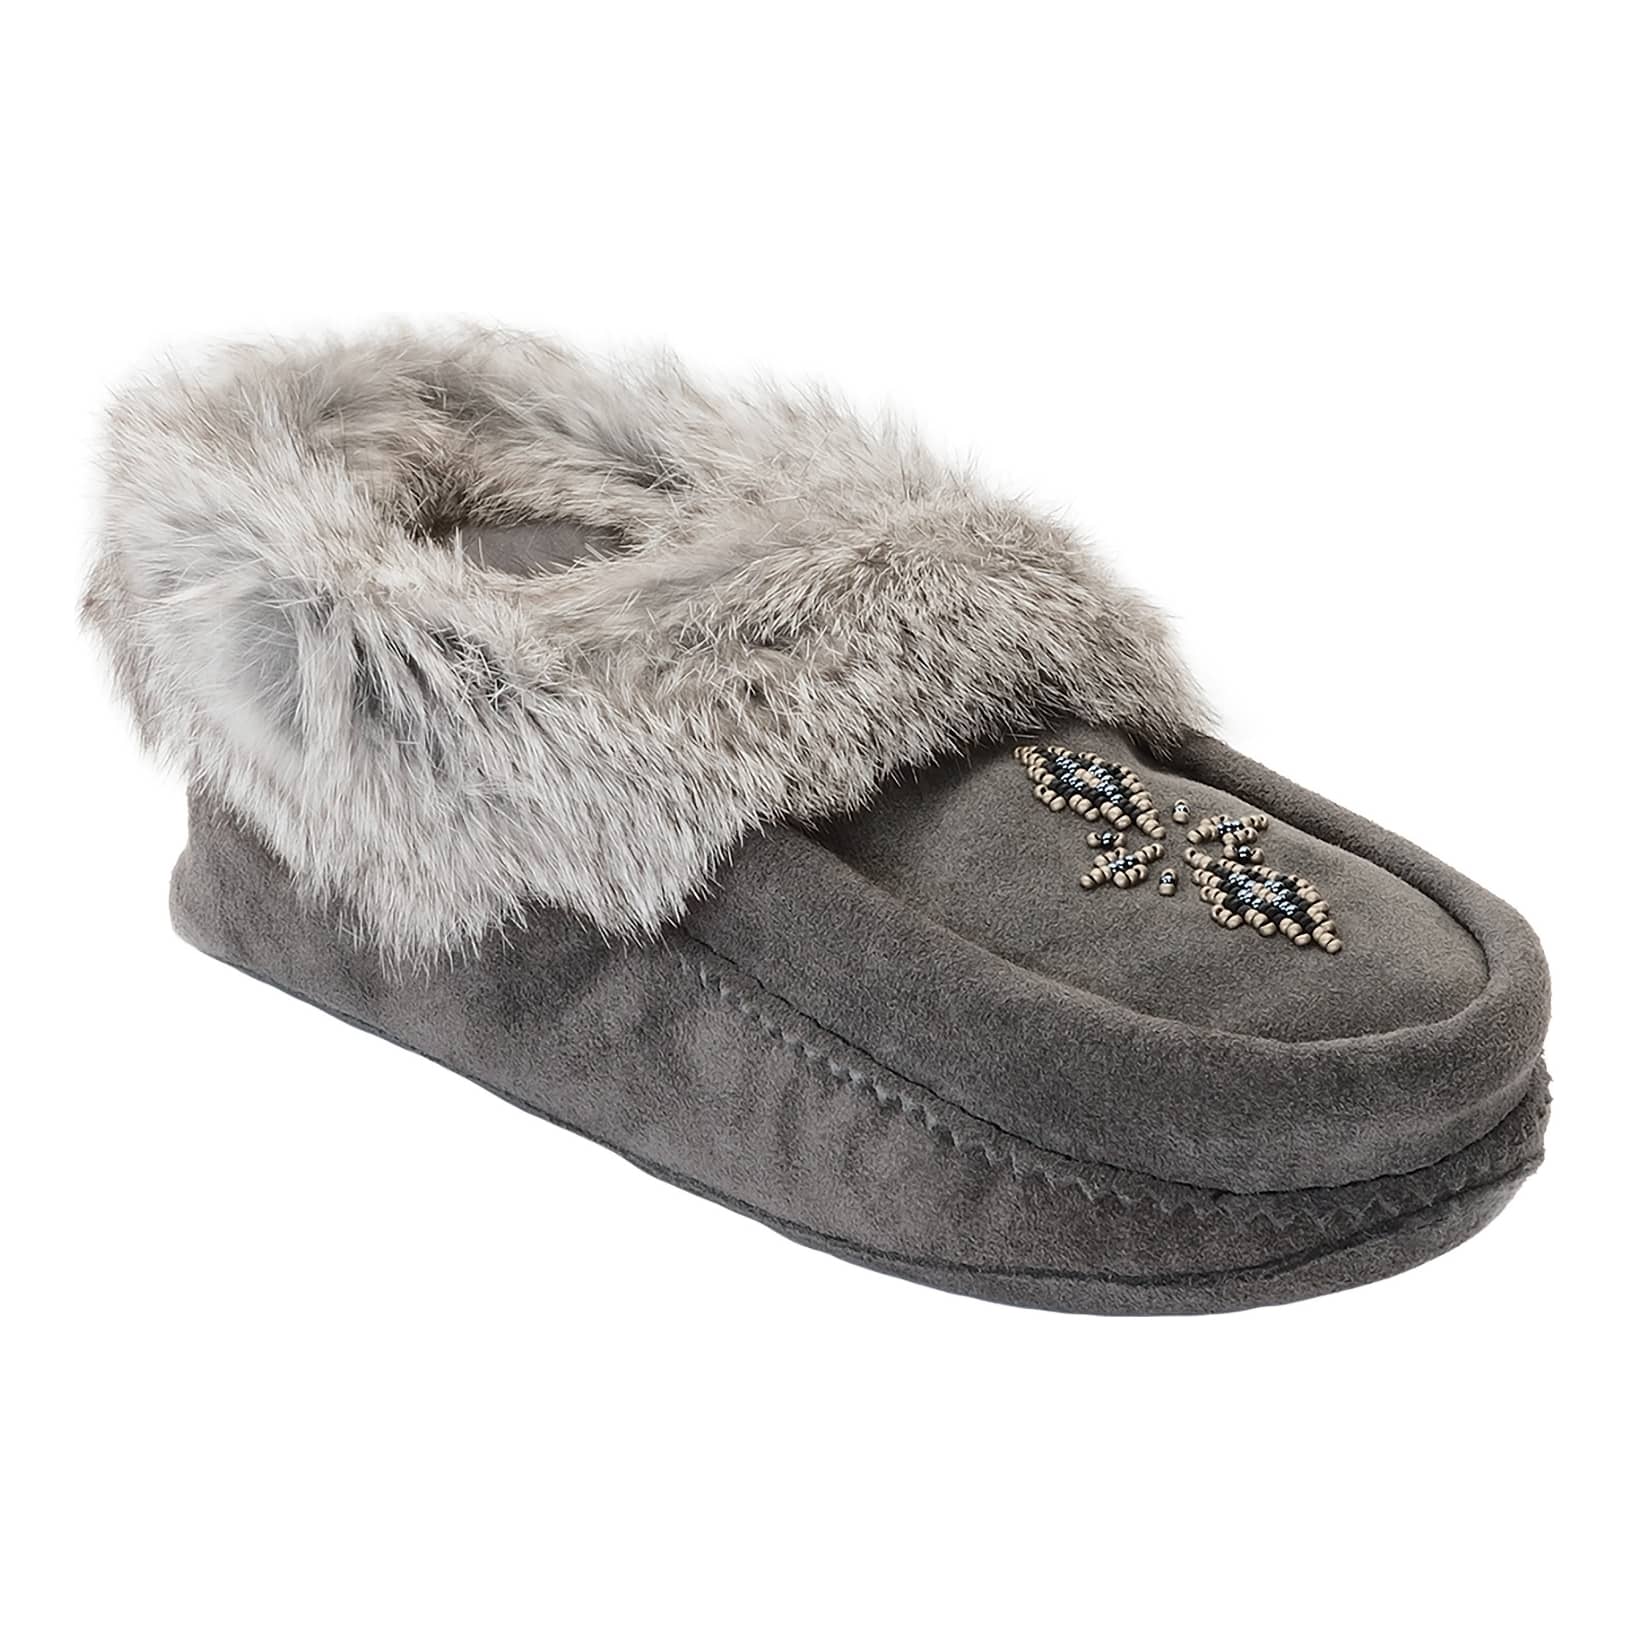 Manitobah Women's Tipi Moccasins - Charcoal